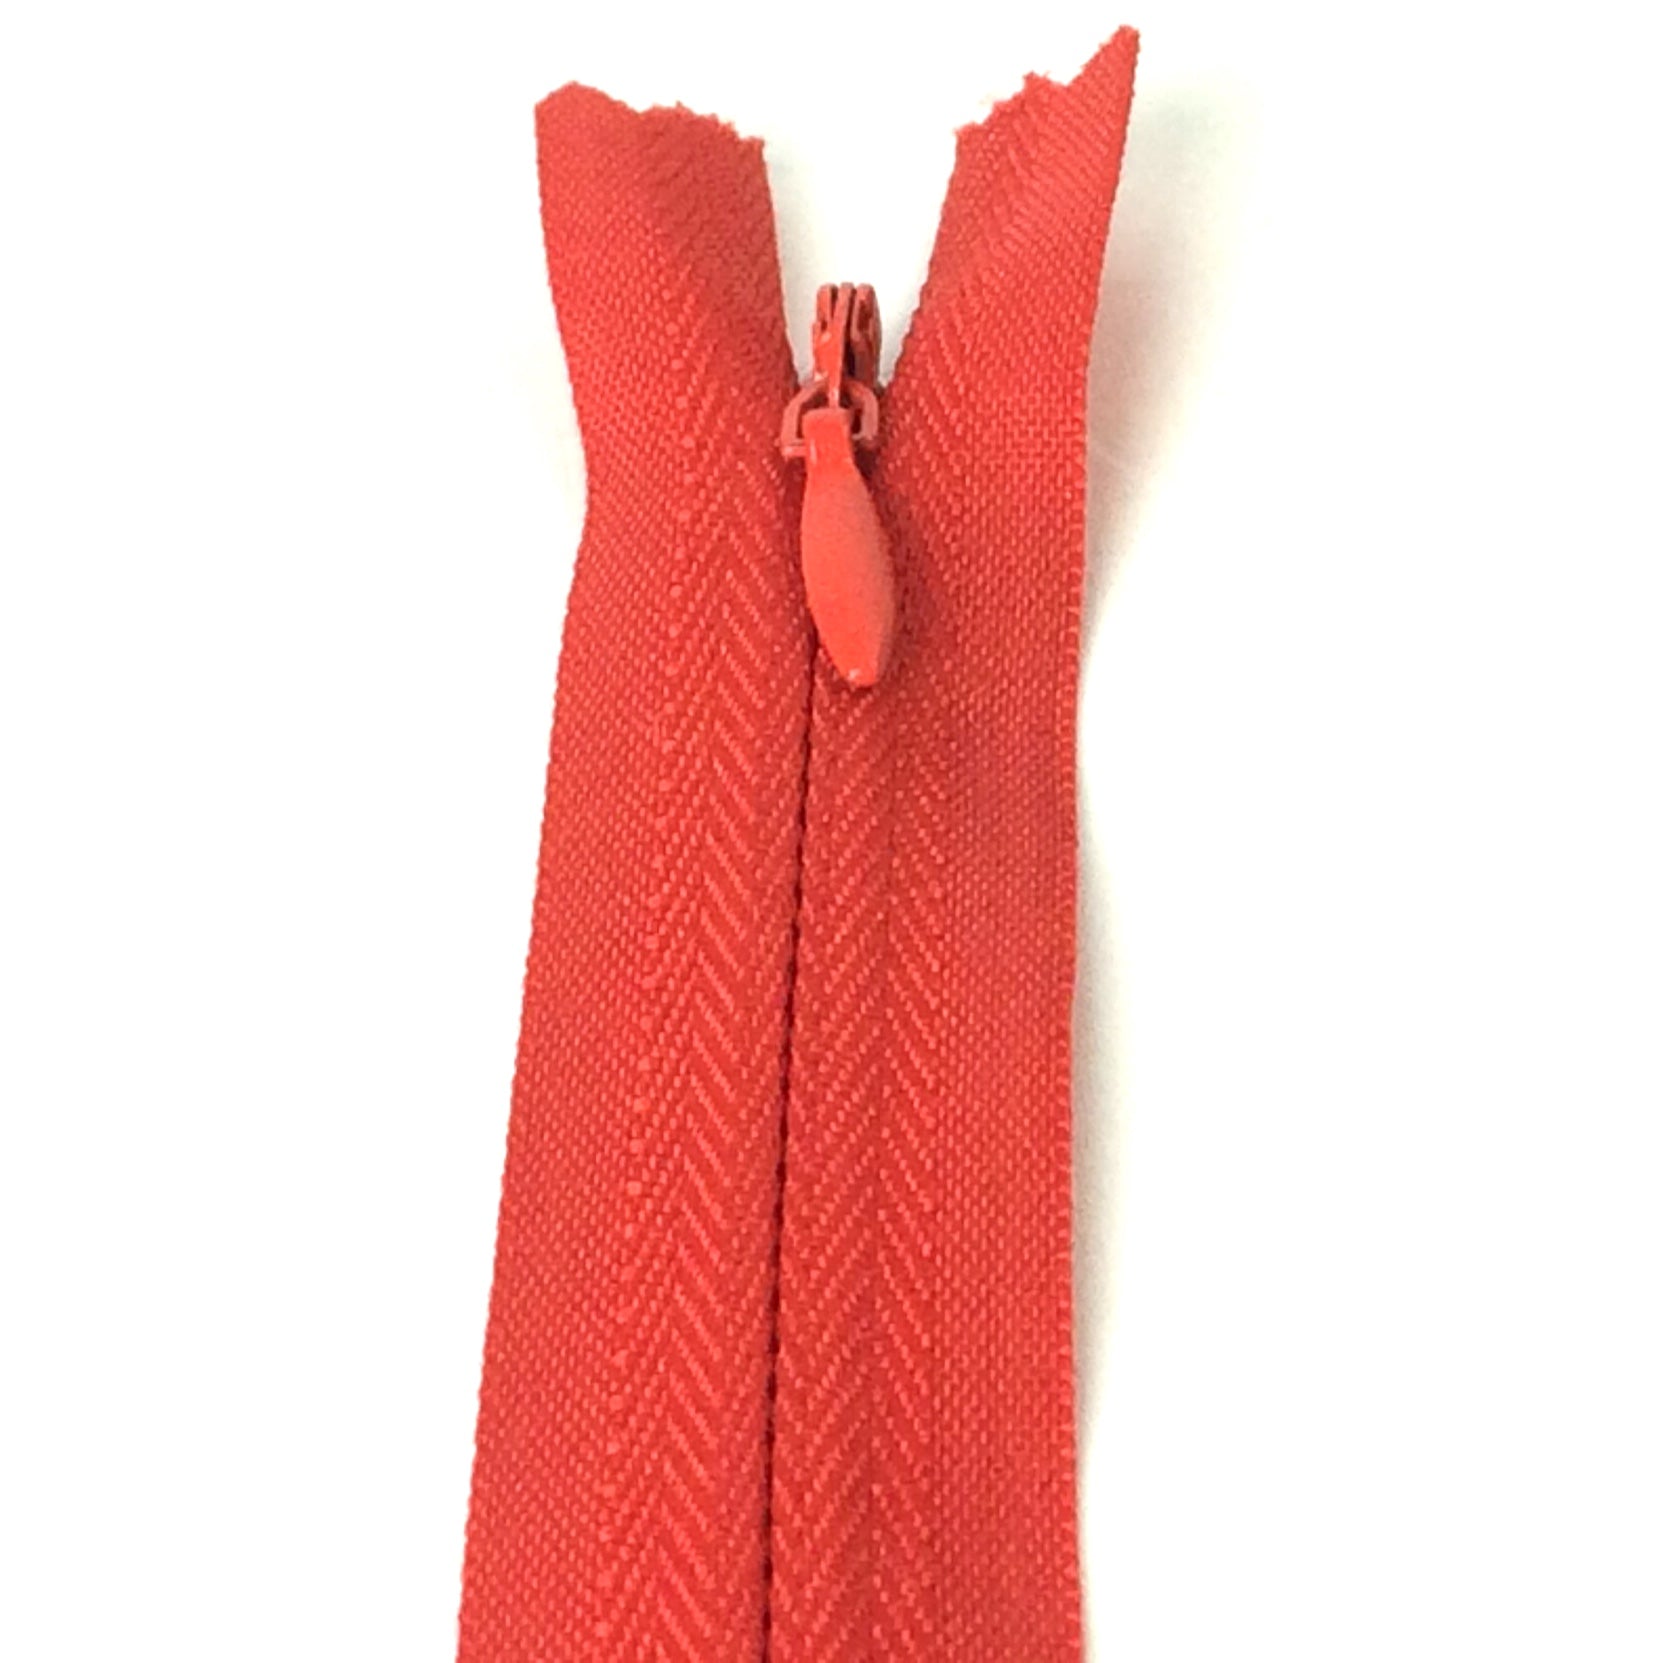 Photo of post box red invisible or concealed zips available in many different colours and sizes. Great for achieving a professional finish in your products. Invisible zippers are perfect for dressmaking, cushions, crafts, etc., where you don't want your zipper showing. Installing them can be tricky without the right foot on your machine; a normal zipper foot is for installing standard zippers, while you will need an invisible zipper foot for a professional result